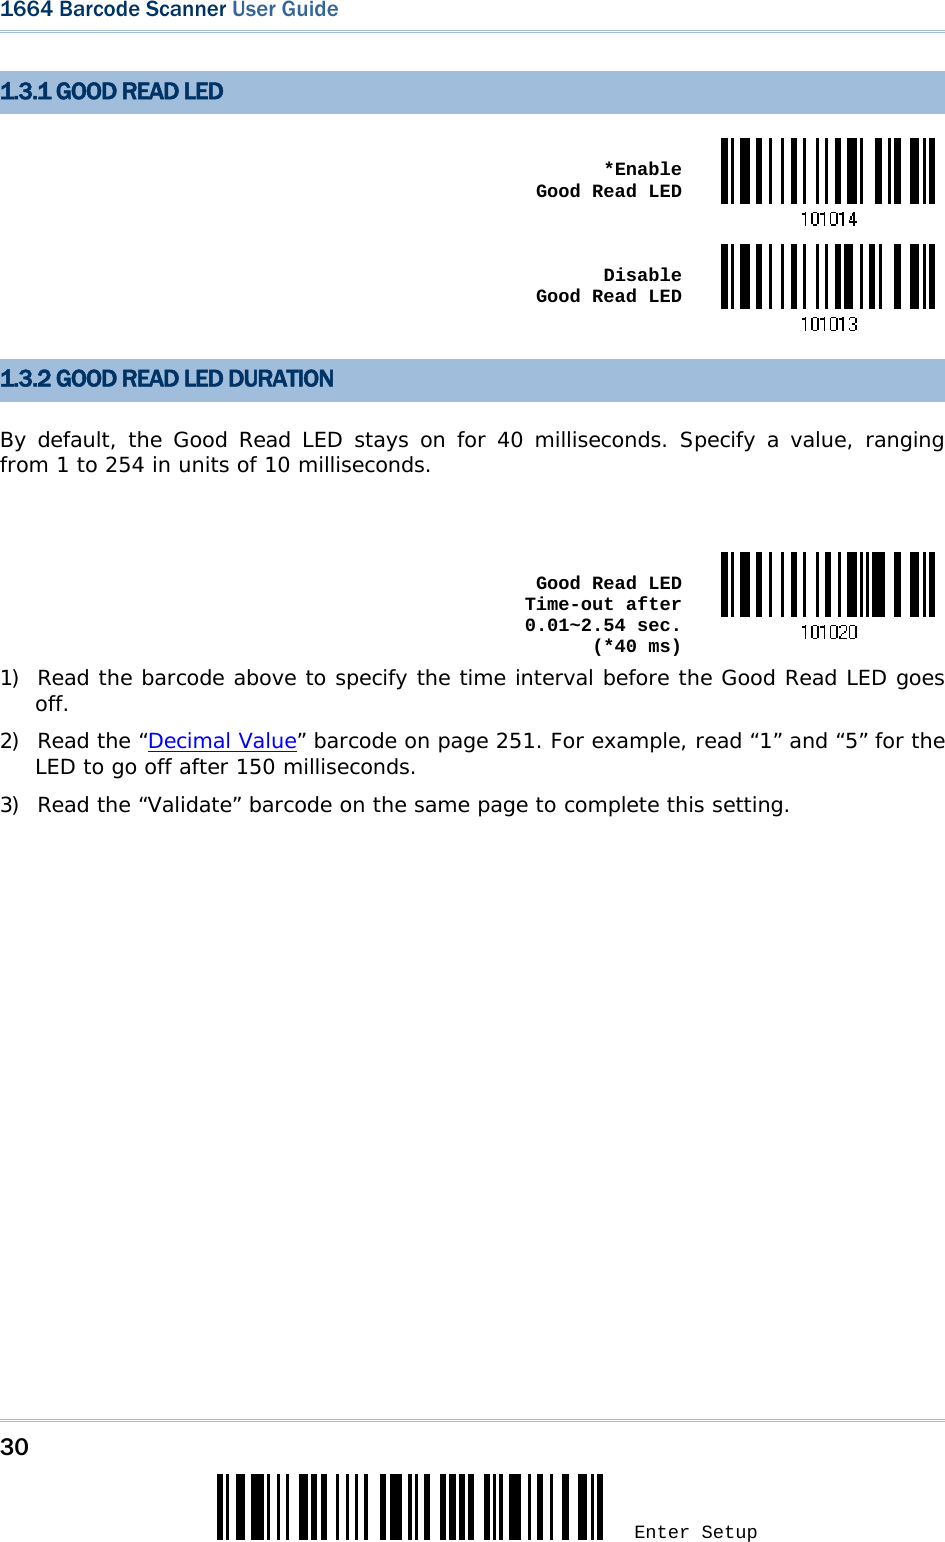 30 Enter Setup 1664 Barcode Scanner User Guide  1.3.1 GOOD READ LED  *Enable  Good Read LED Disable  Good Read LED 1.3.2 GOOD READ LED DURATION By default, the Good Read LED stays on for 40 milliseconds. Specify a value, ranging from 1 to 254 in units of 10 milliseconds.   Good Read LED Time-out after 0.01~2.54 sec.  (*40 ms)1) Read the barcode above to specify the time interval before the Good Read LED goes off. 2) Read the “Decimal Value” barcode on page 251. For example, read “1” and “5” for the LED to go off after 150 milliseconds.  3) Read the “Validate” barcode on the same page to complete this setting.  